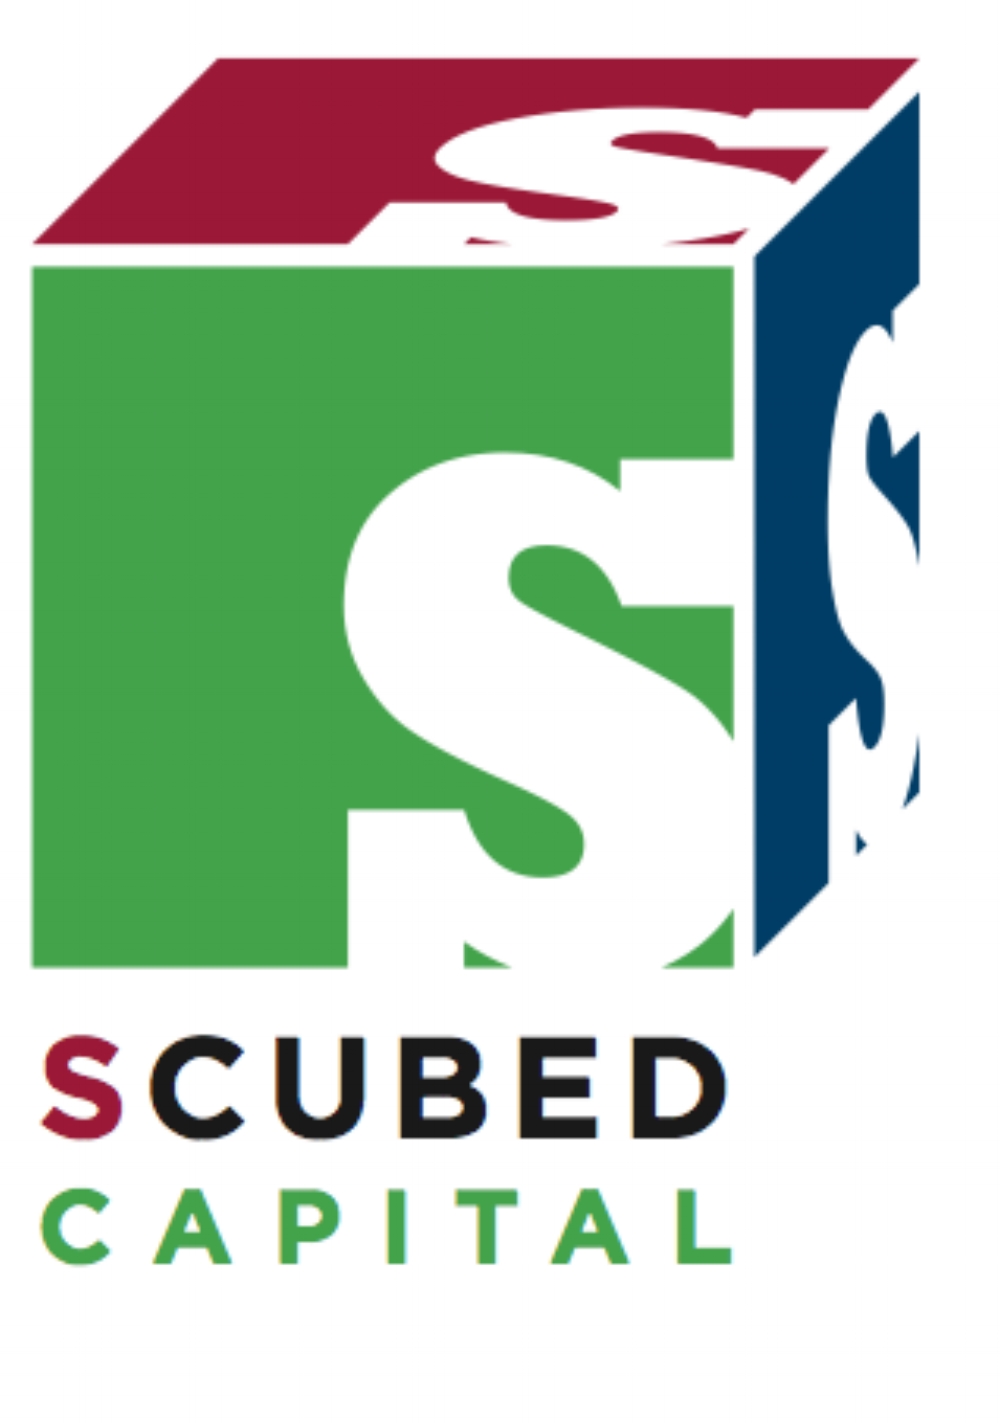 S-Cubed Capital